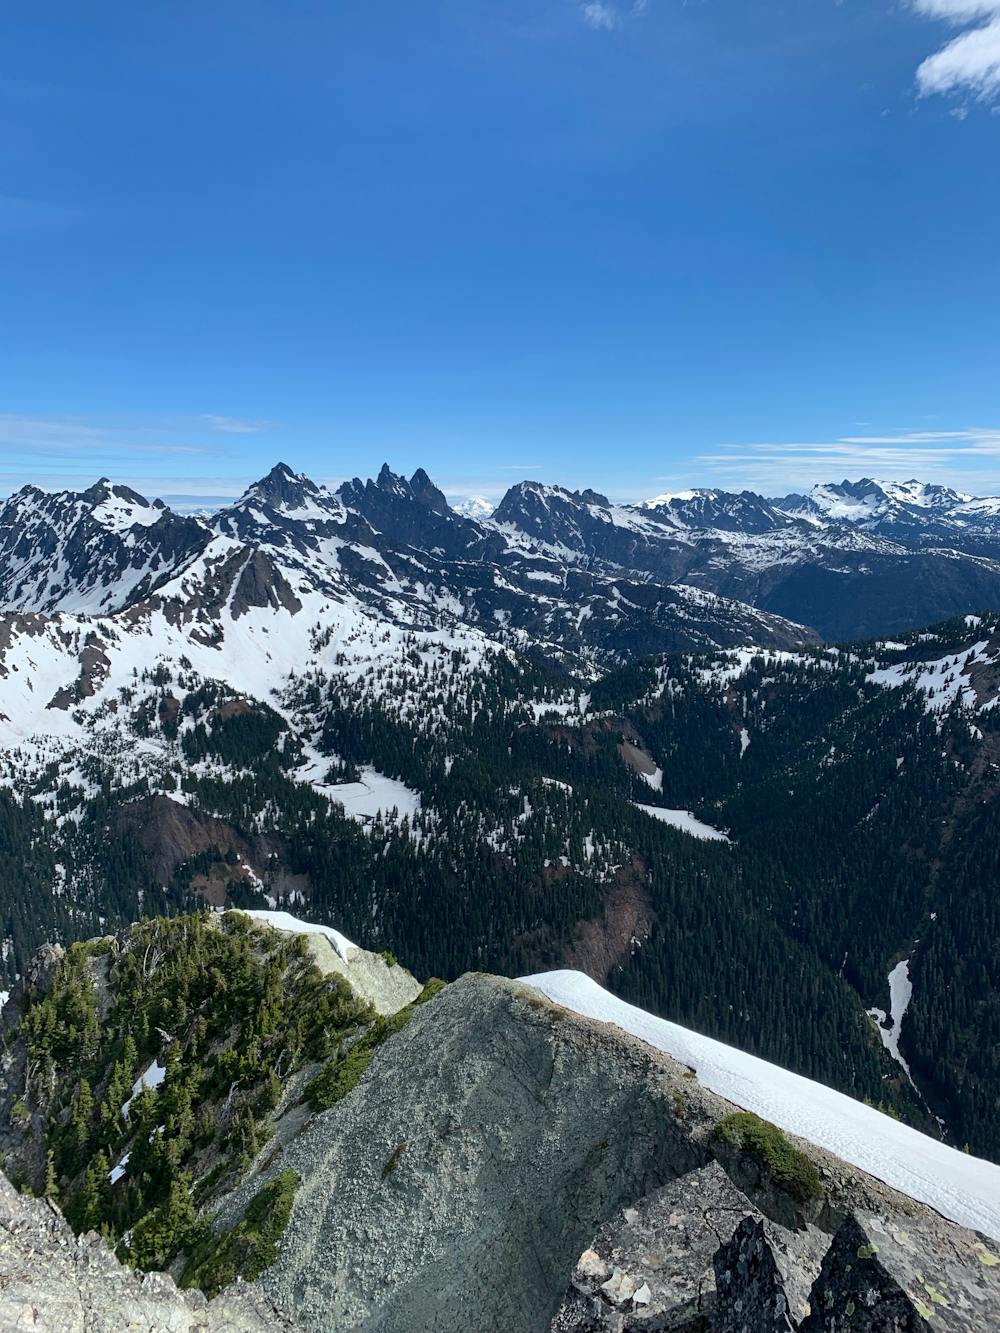 View north from the Hibox summit. Glacier Peak in the distance.